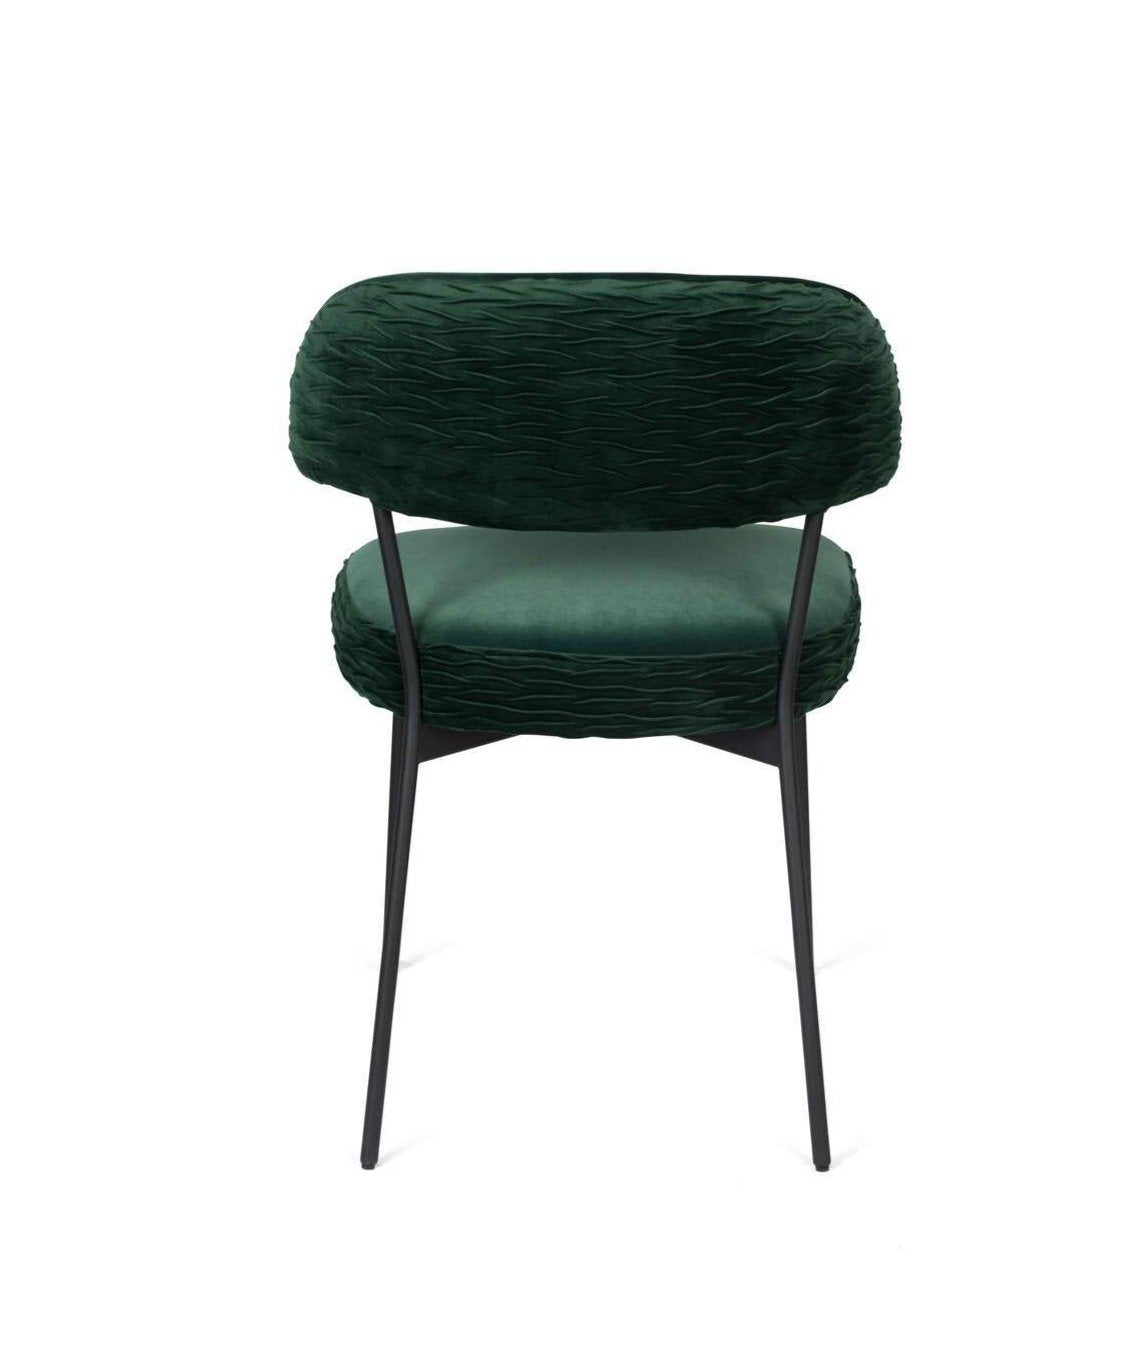 We present a dining room chair, which should not miss the dining room chairs: our Bold Monkey the Winner Takes It All chair. A simple, modernist design was made here in a clear range of shades: boldly choose from these stunning colors.